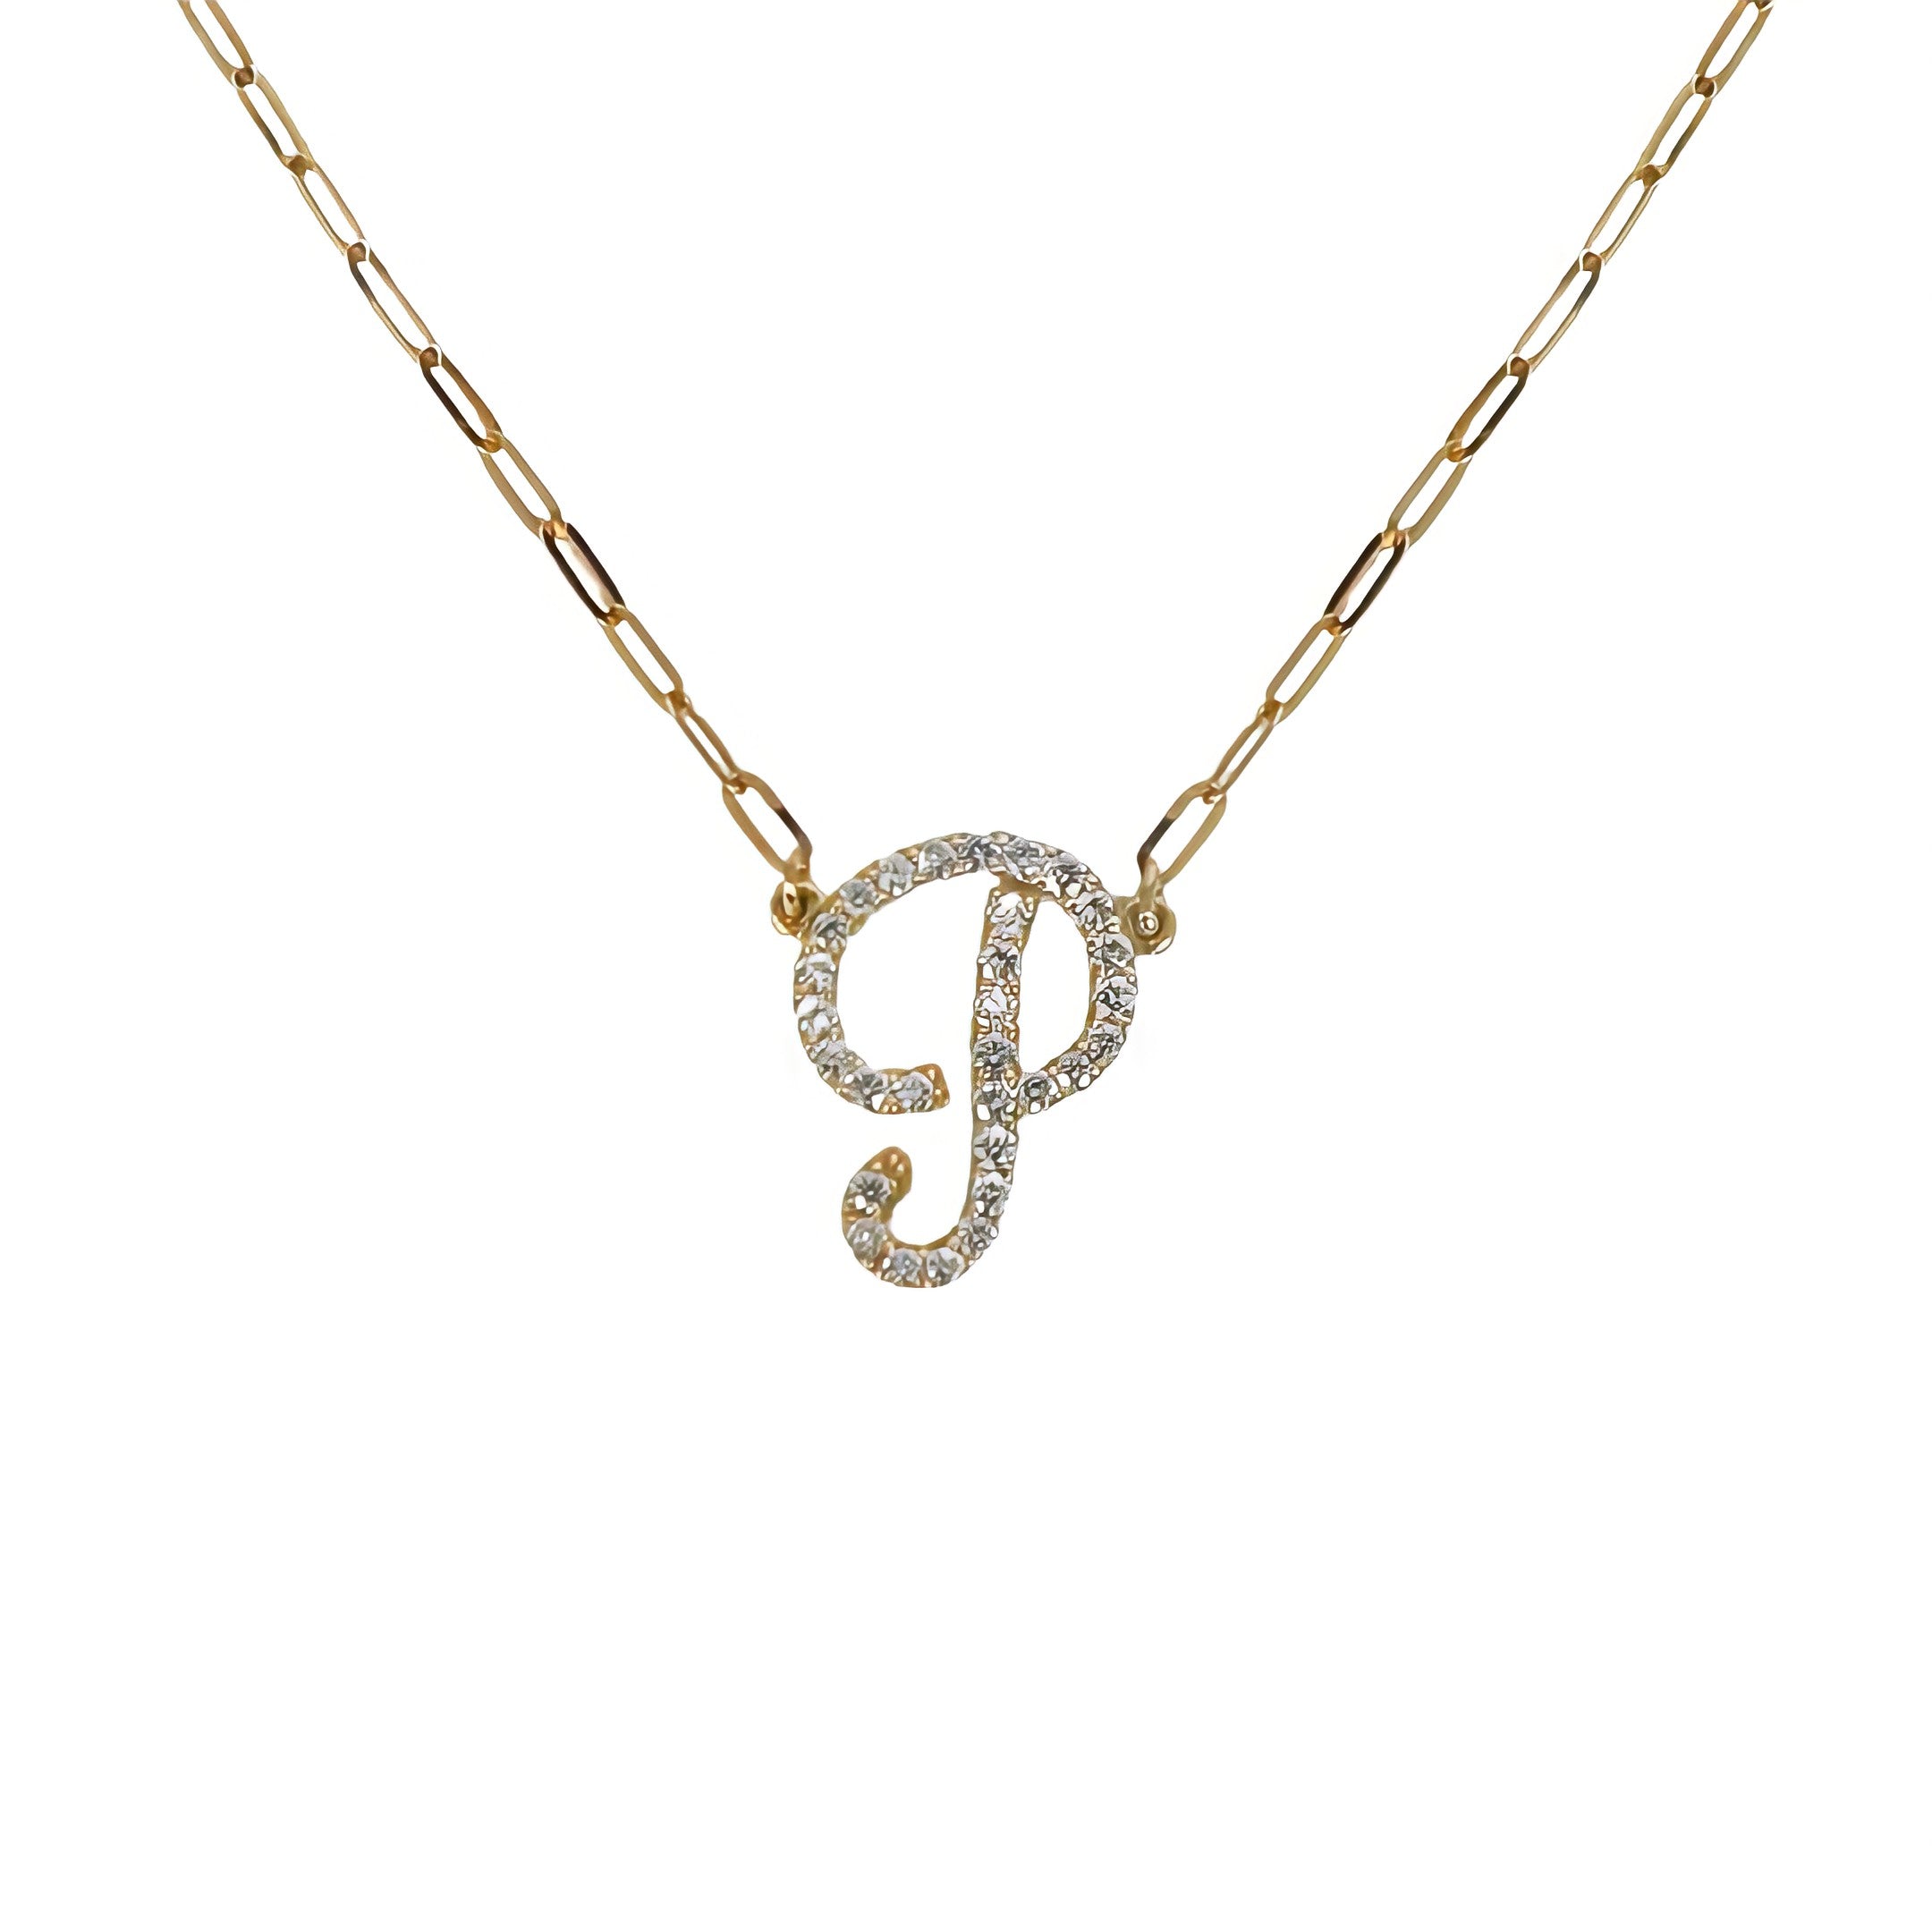 14K YELLOW GOLD DIAMOND SCRIPT INITIAL PAPERCLIP NECKLACE